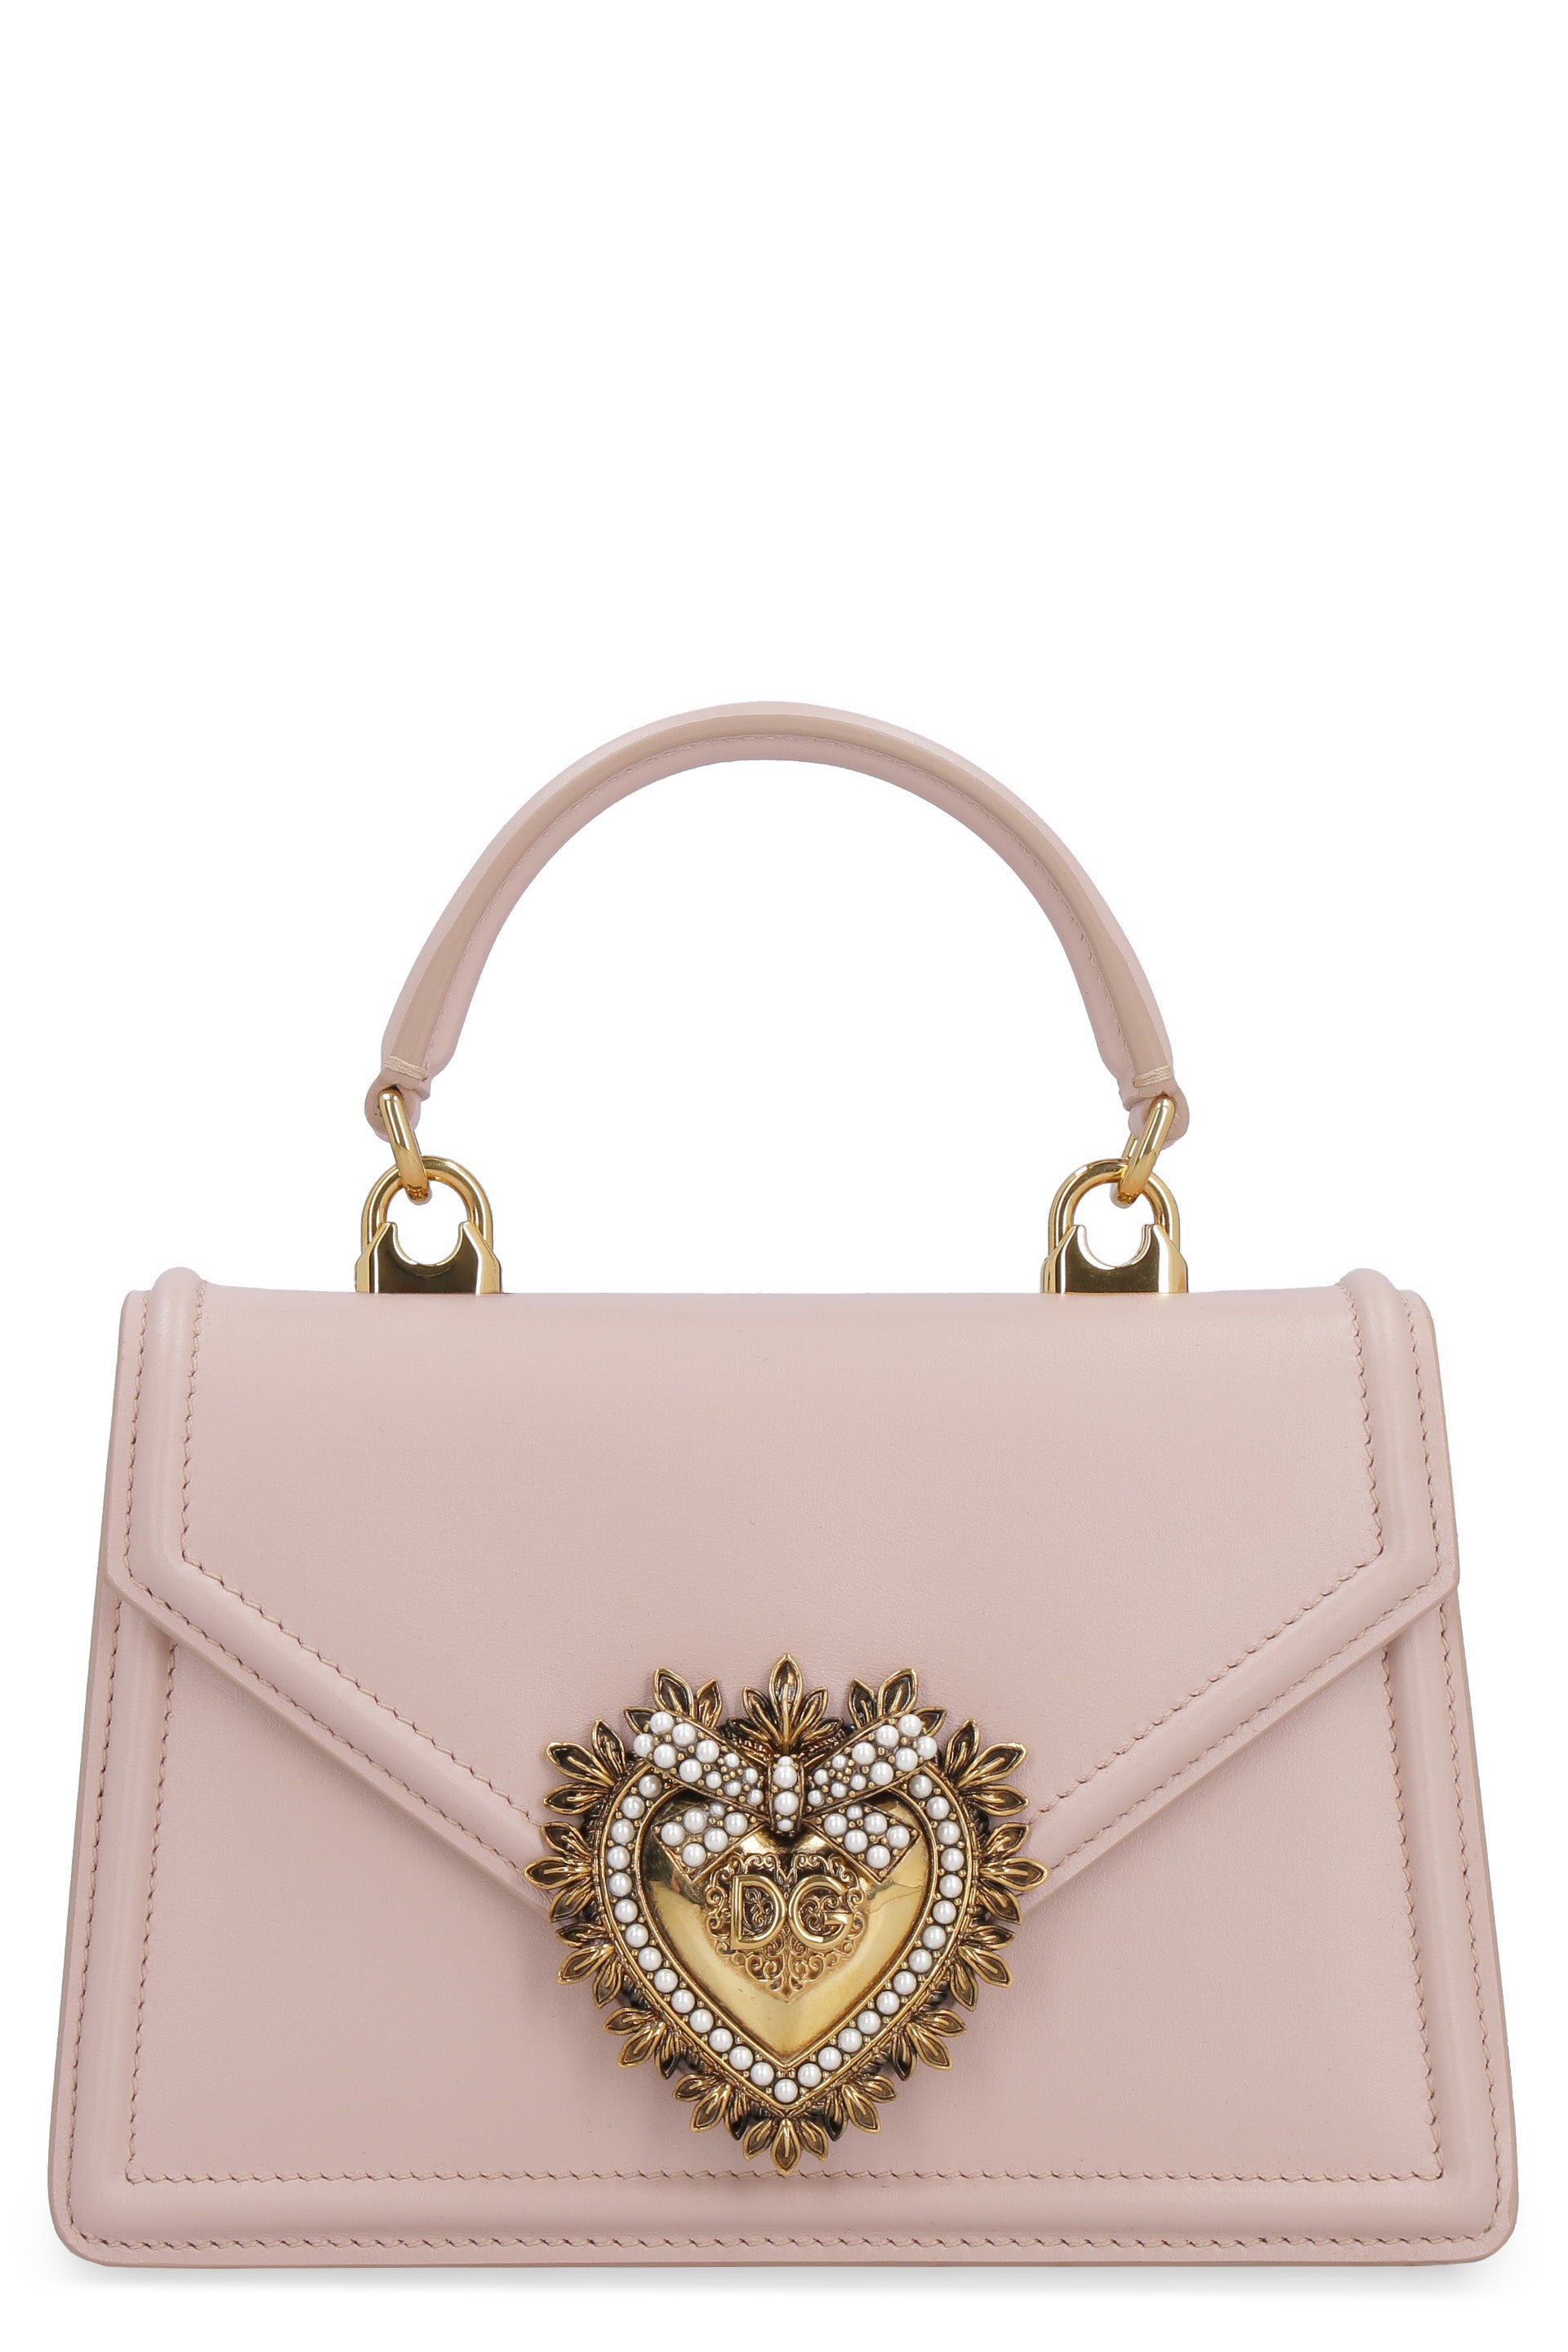 Shop Dolce & Gabbana Luxurious Pale Pink Leather Mini-handbag With Embellished Applique